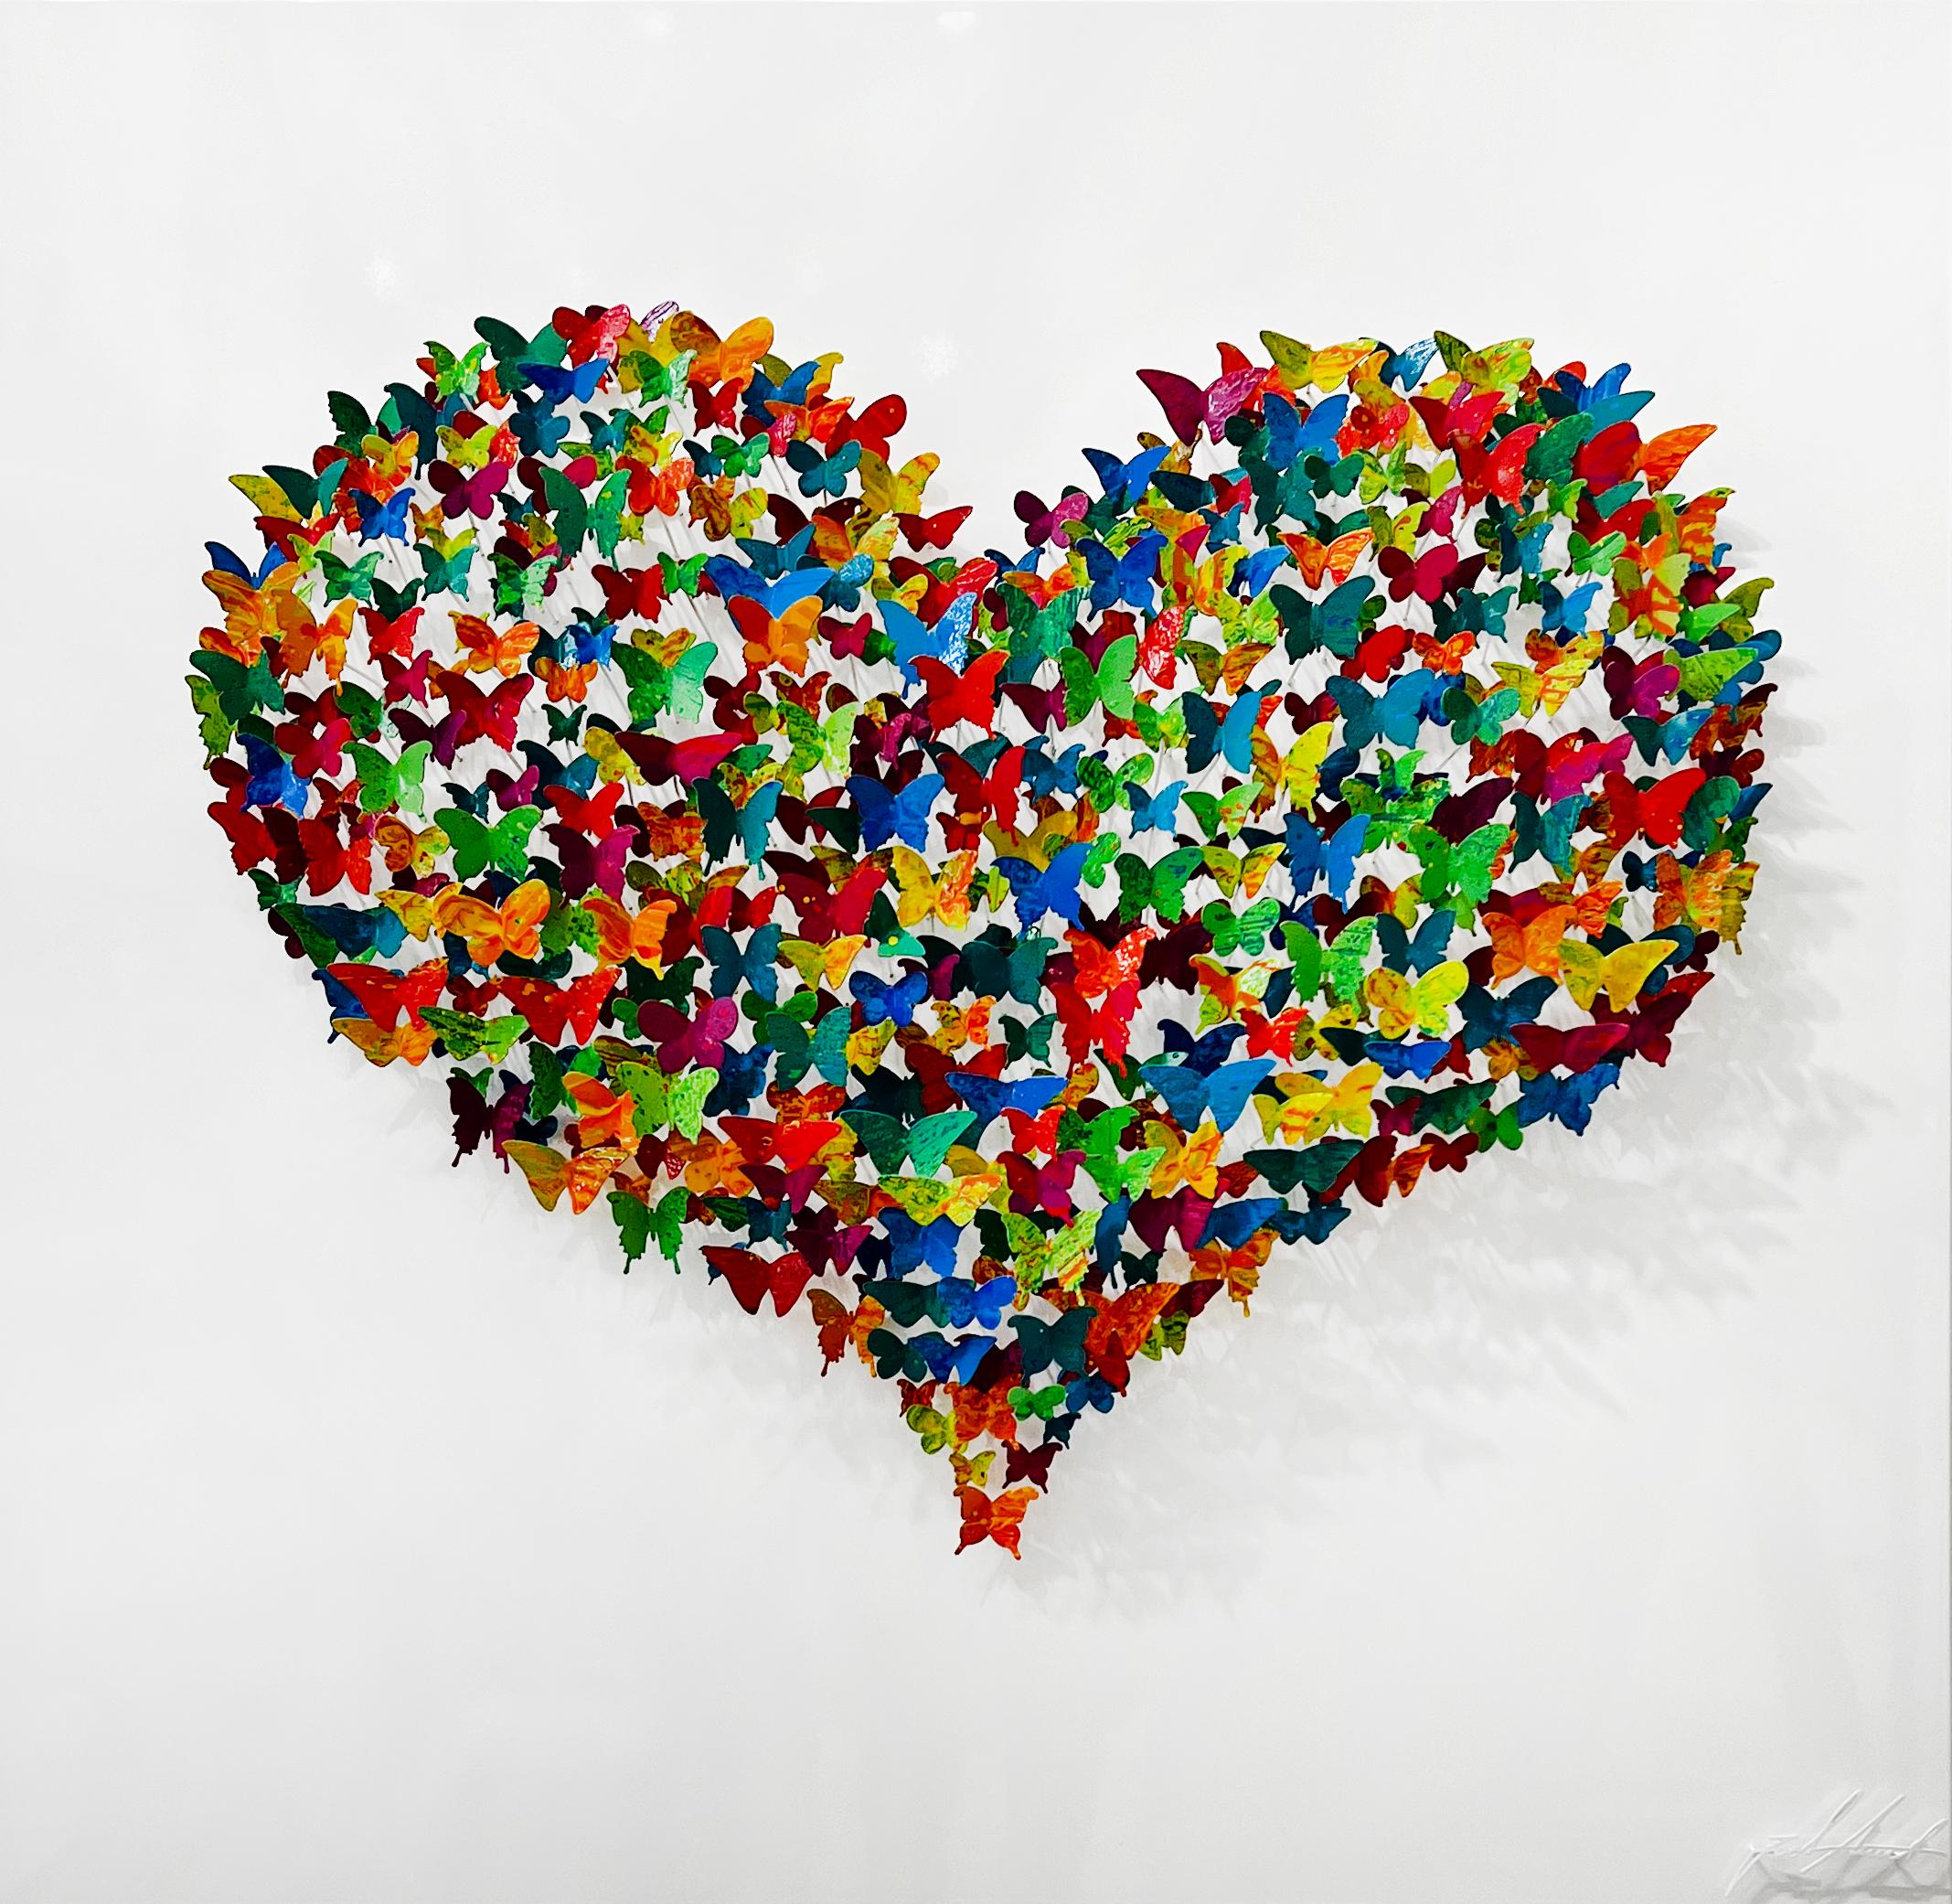 Flying Love - candy, Mixed Media Metal Wall Sculpture - Mixed Media Art by Joel Amit